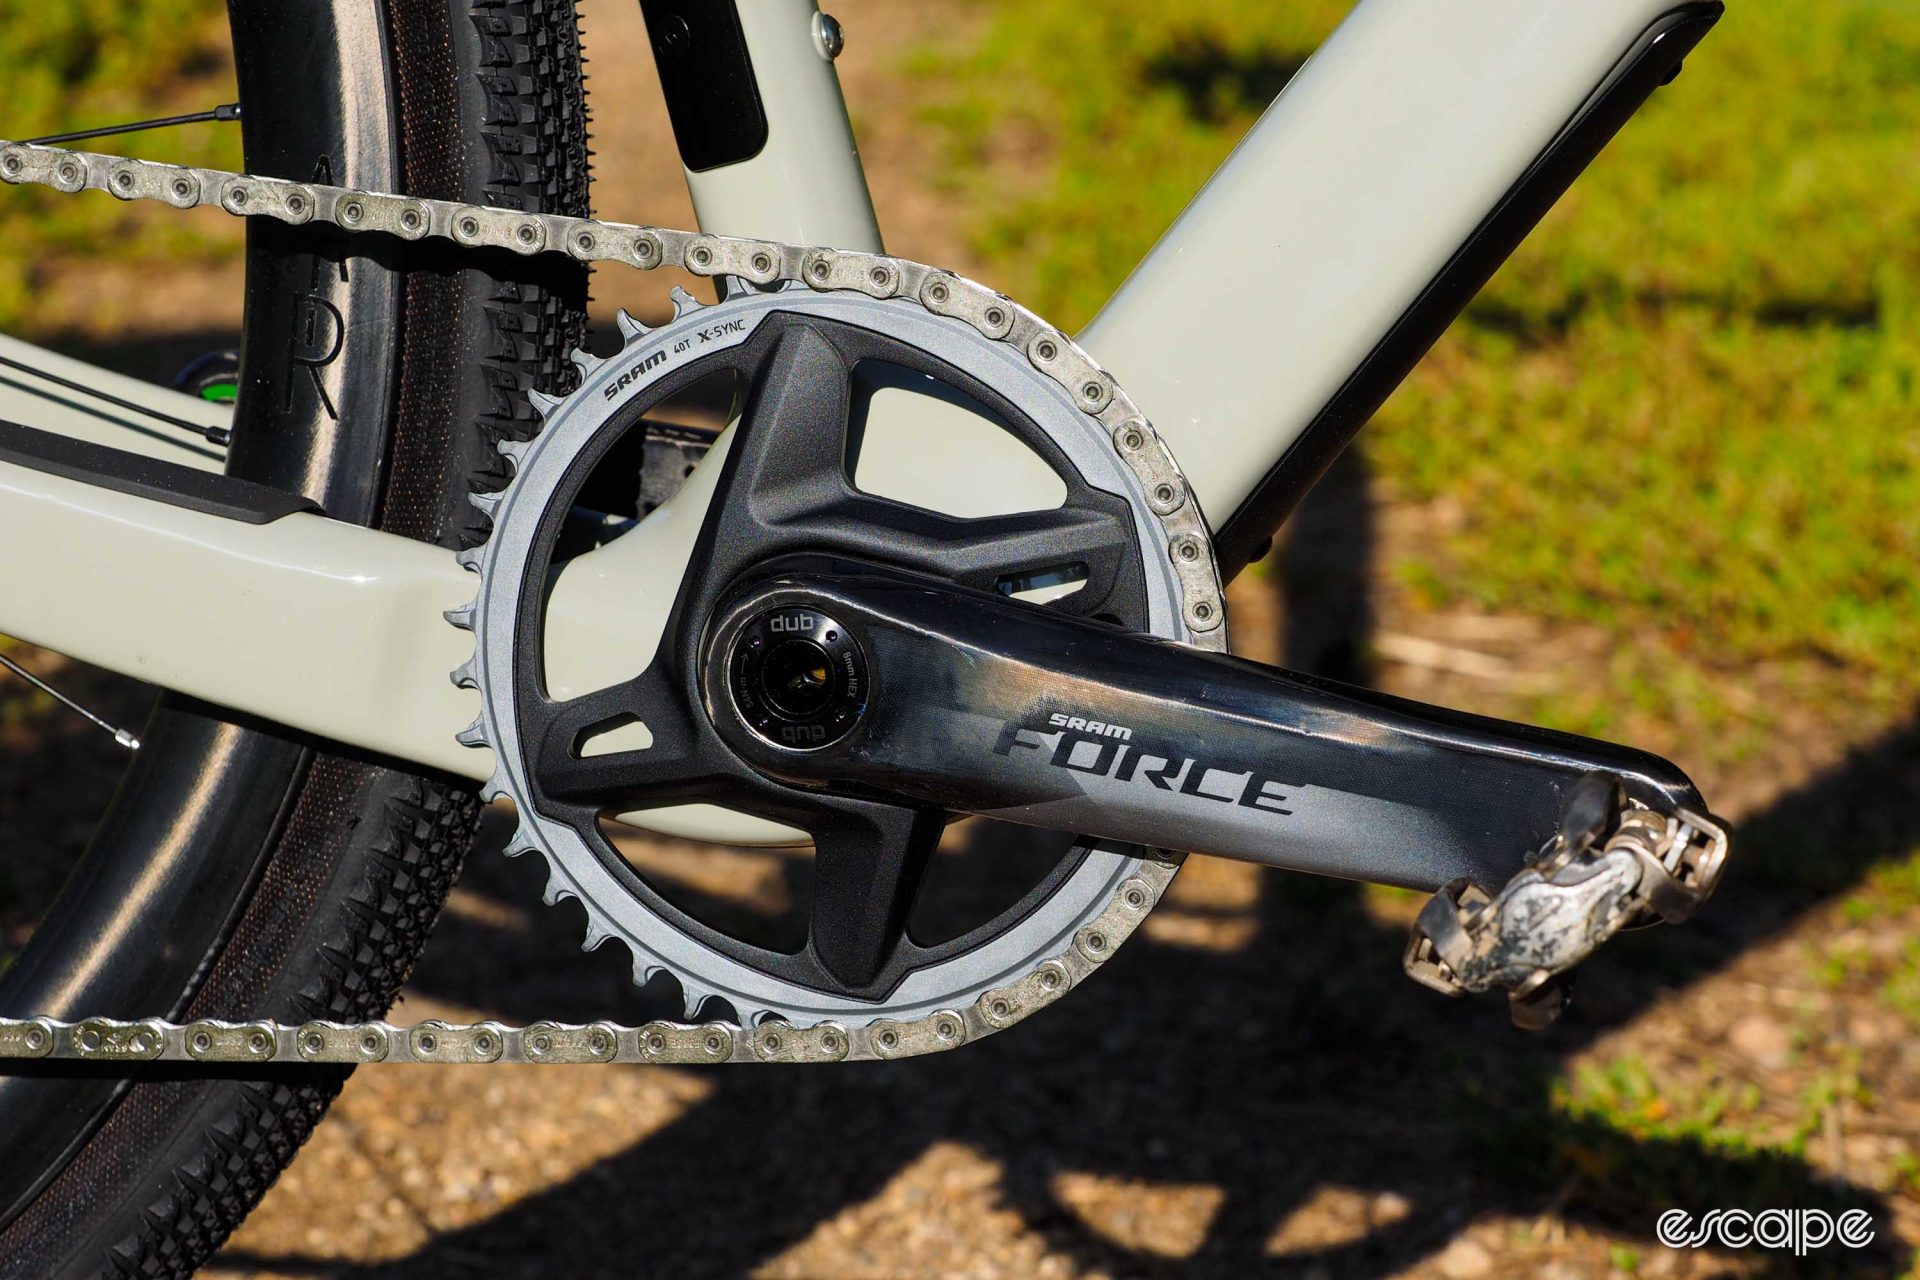 SRAM Force crankset with a 1x40T ring.